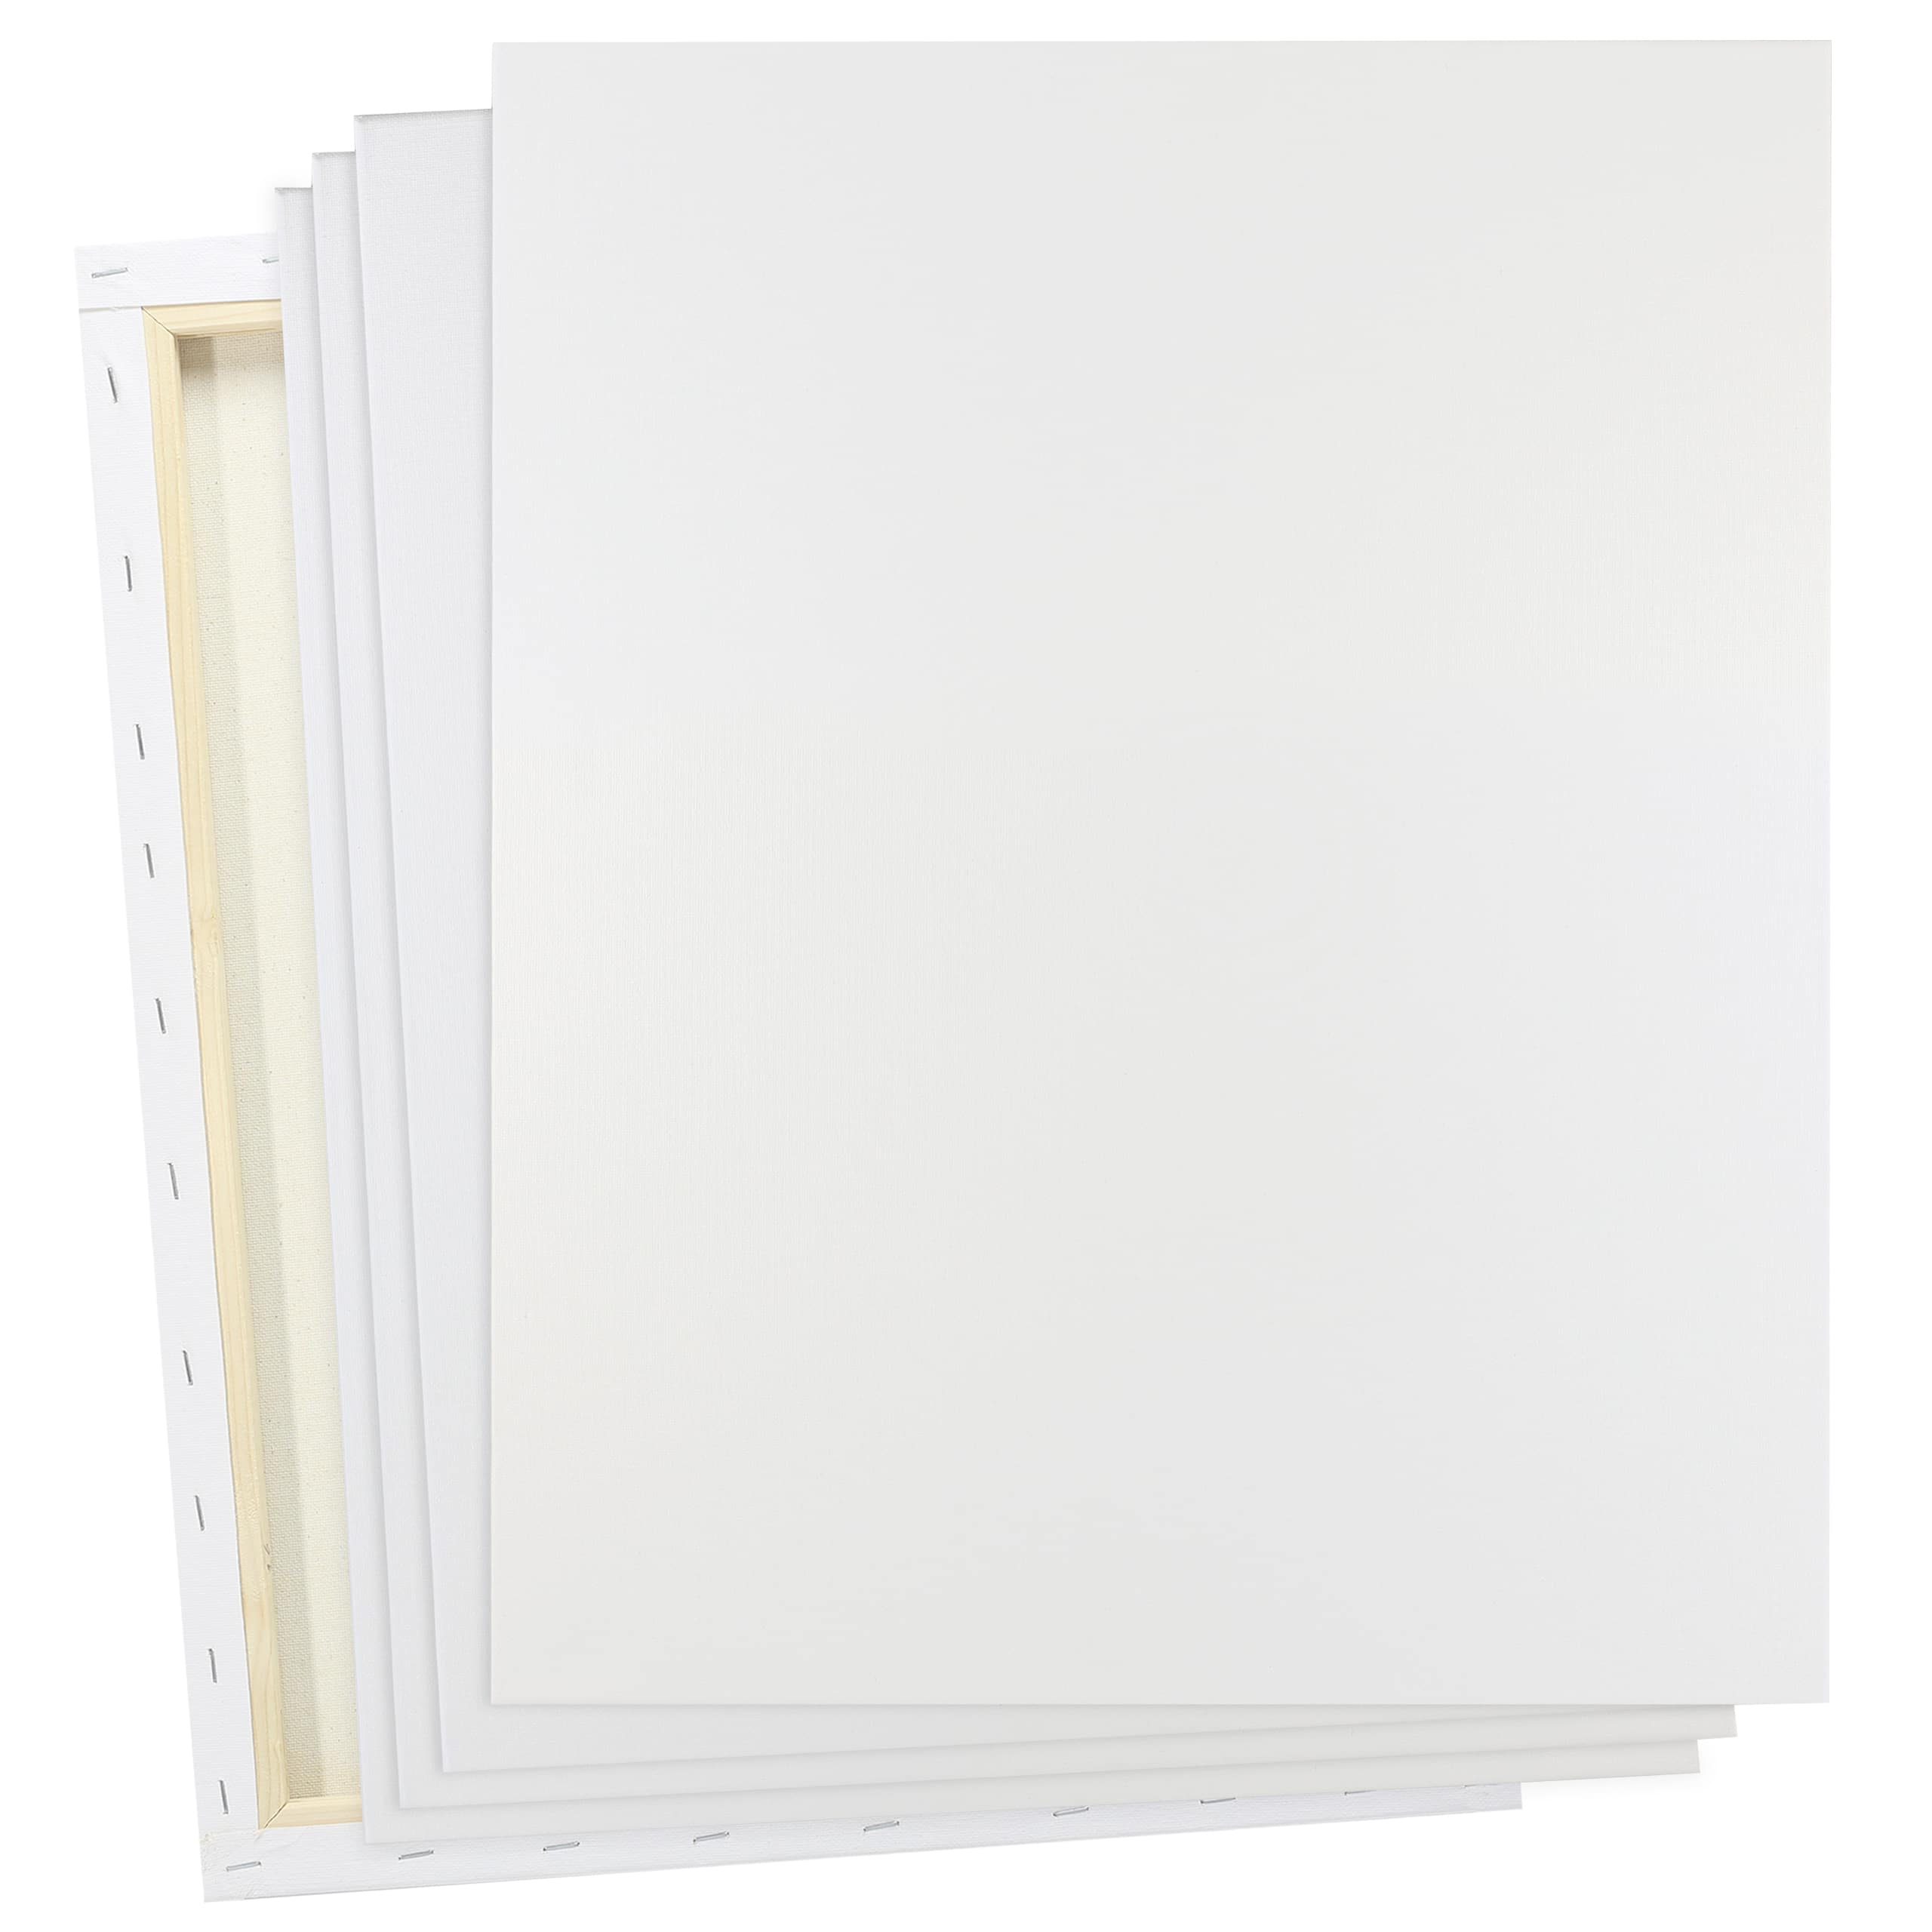 Pre-Printed Canvas Panels By Creatology™, 8 Pack